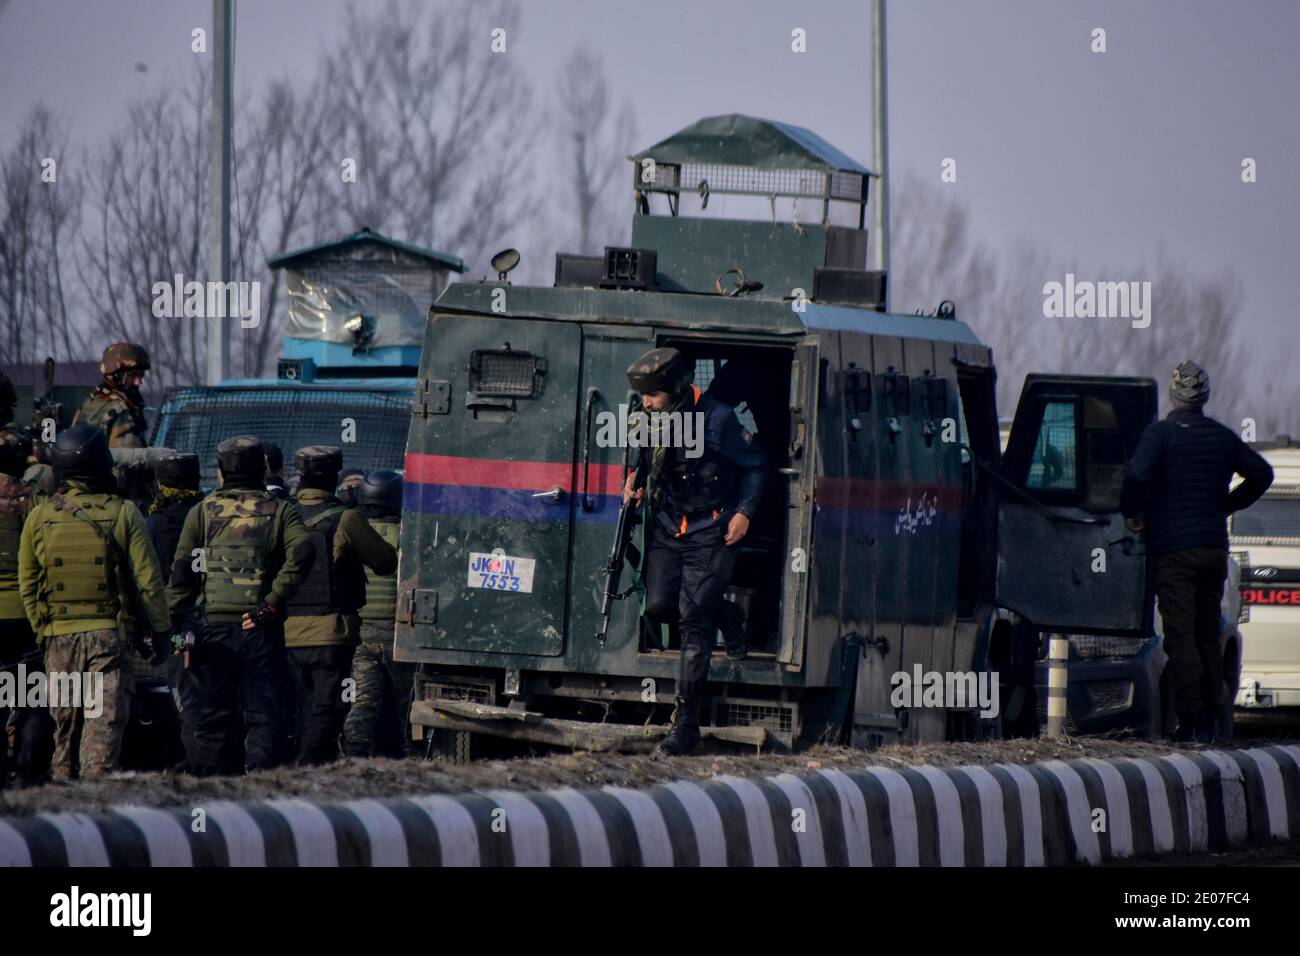 December 30, 2020: Indian forces arrive near an encounter site during an encounter with Millitants in HMT area of Srinagar, Indian Administered Kashmir on 30 December2020. Three millitants were killed in an overnight encounter with Indian Forces. Credit: Muzamil Mattoo/IMAGESLIVE/ZUMA Wire/Alamy Live News Stock Photo